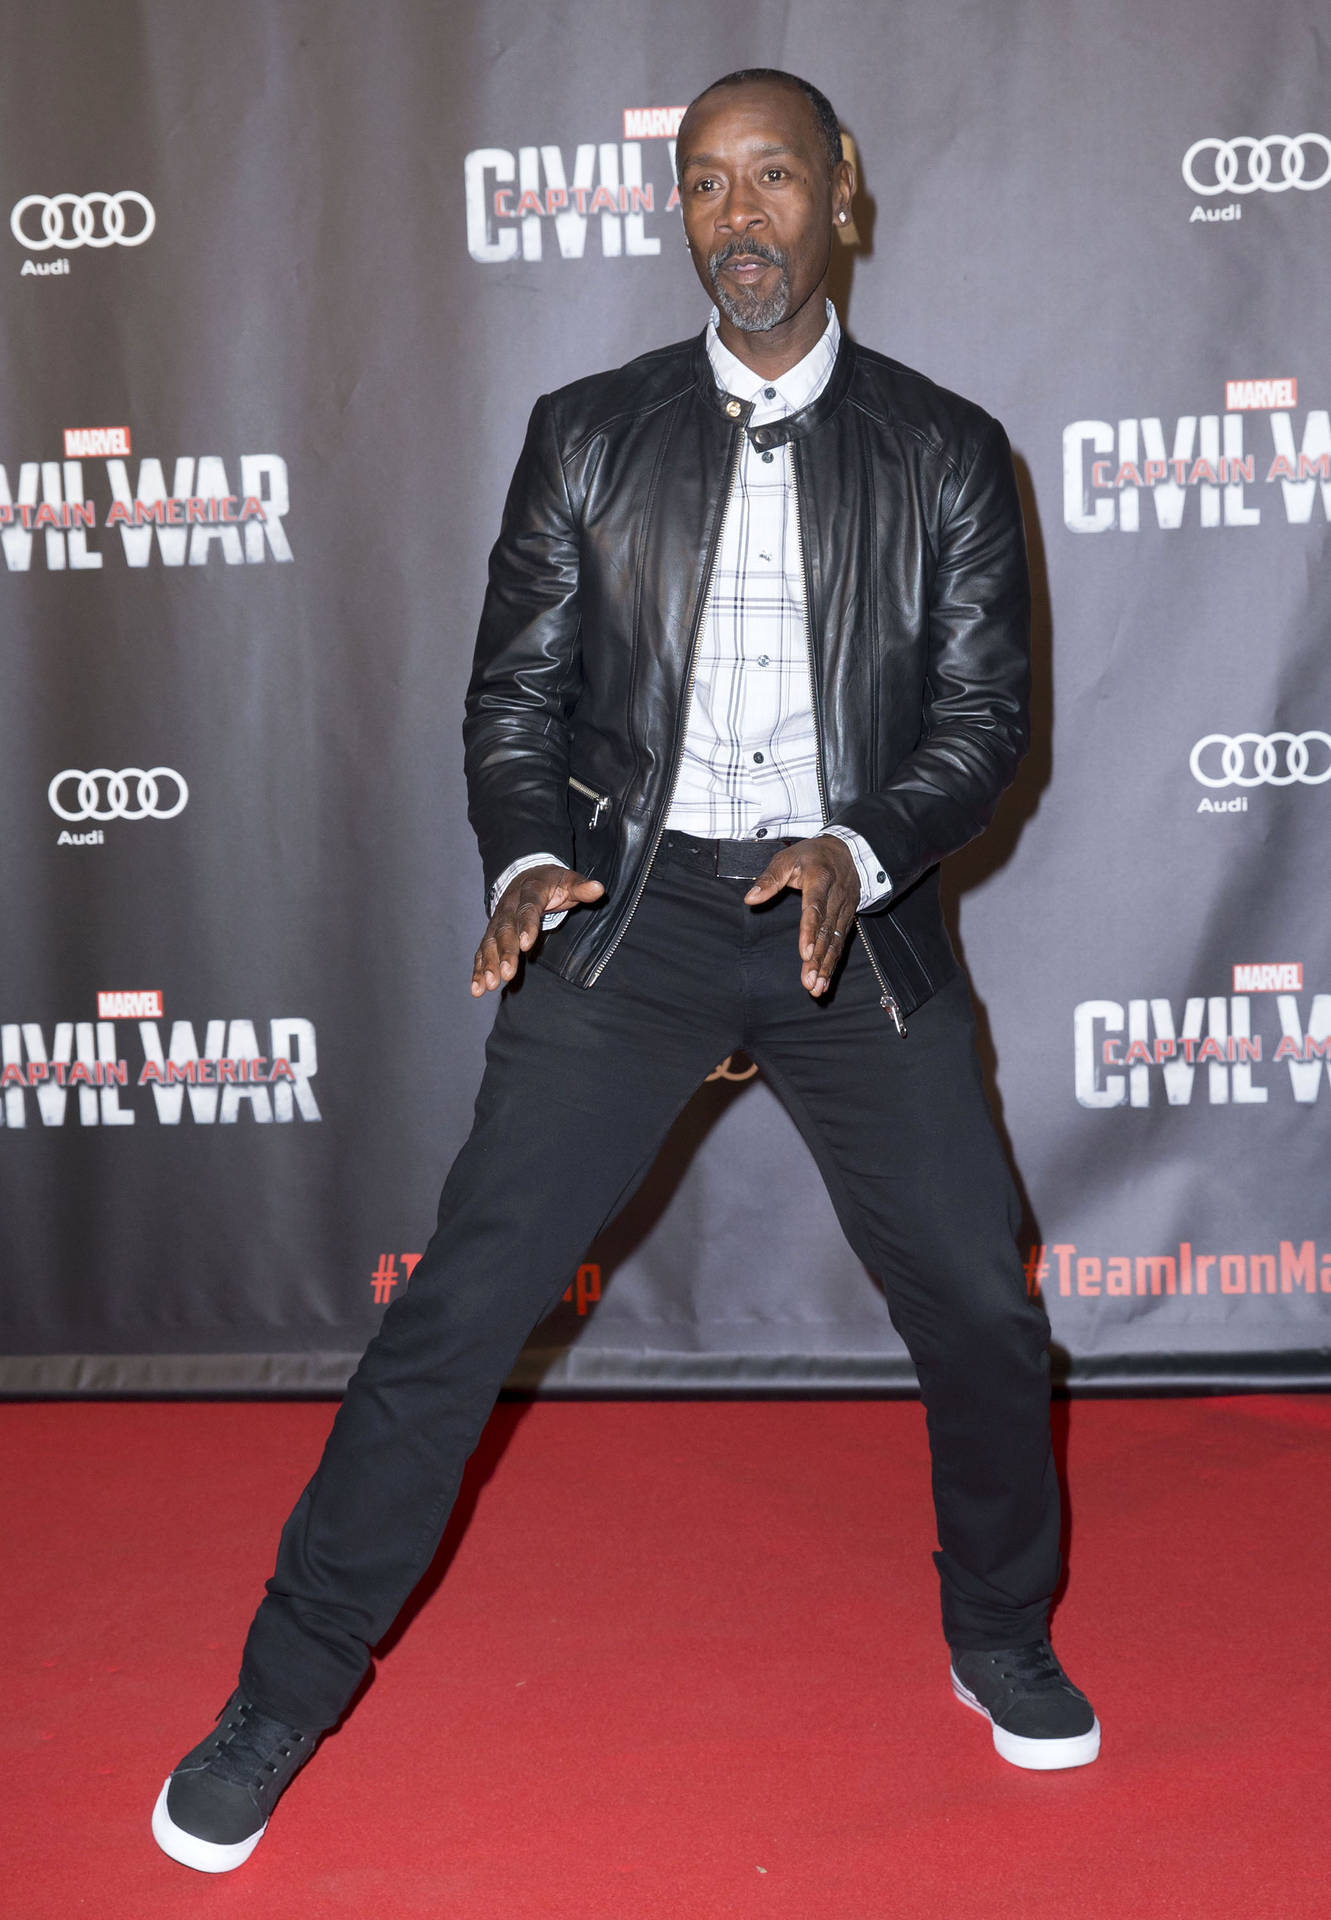 Don Cheadle at a Film Screening Event Wallpaper